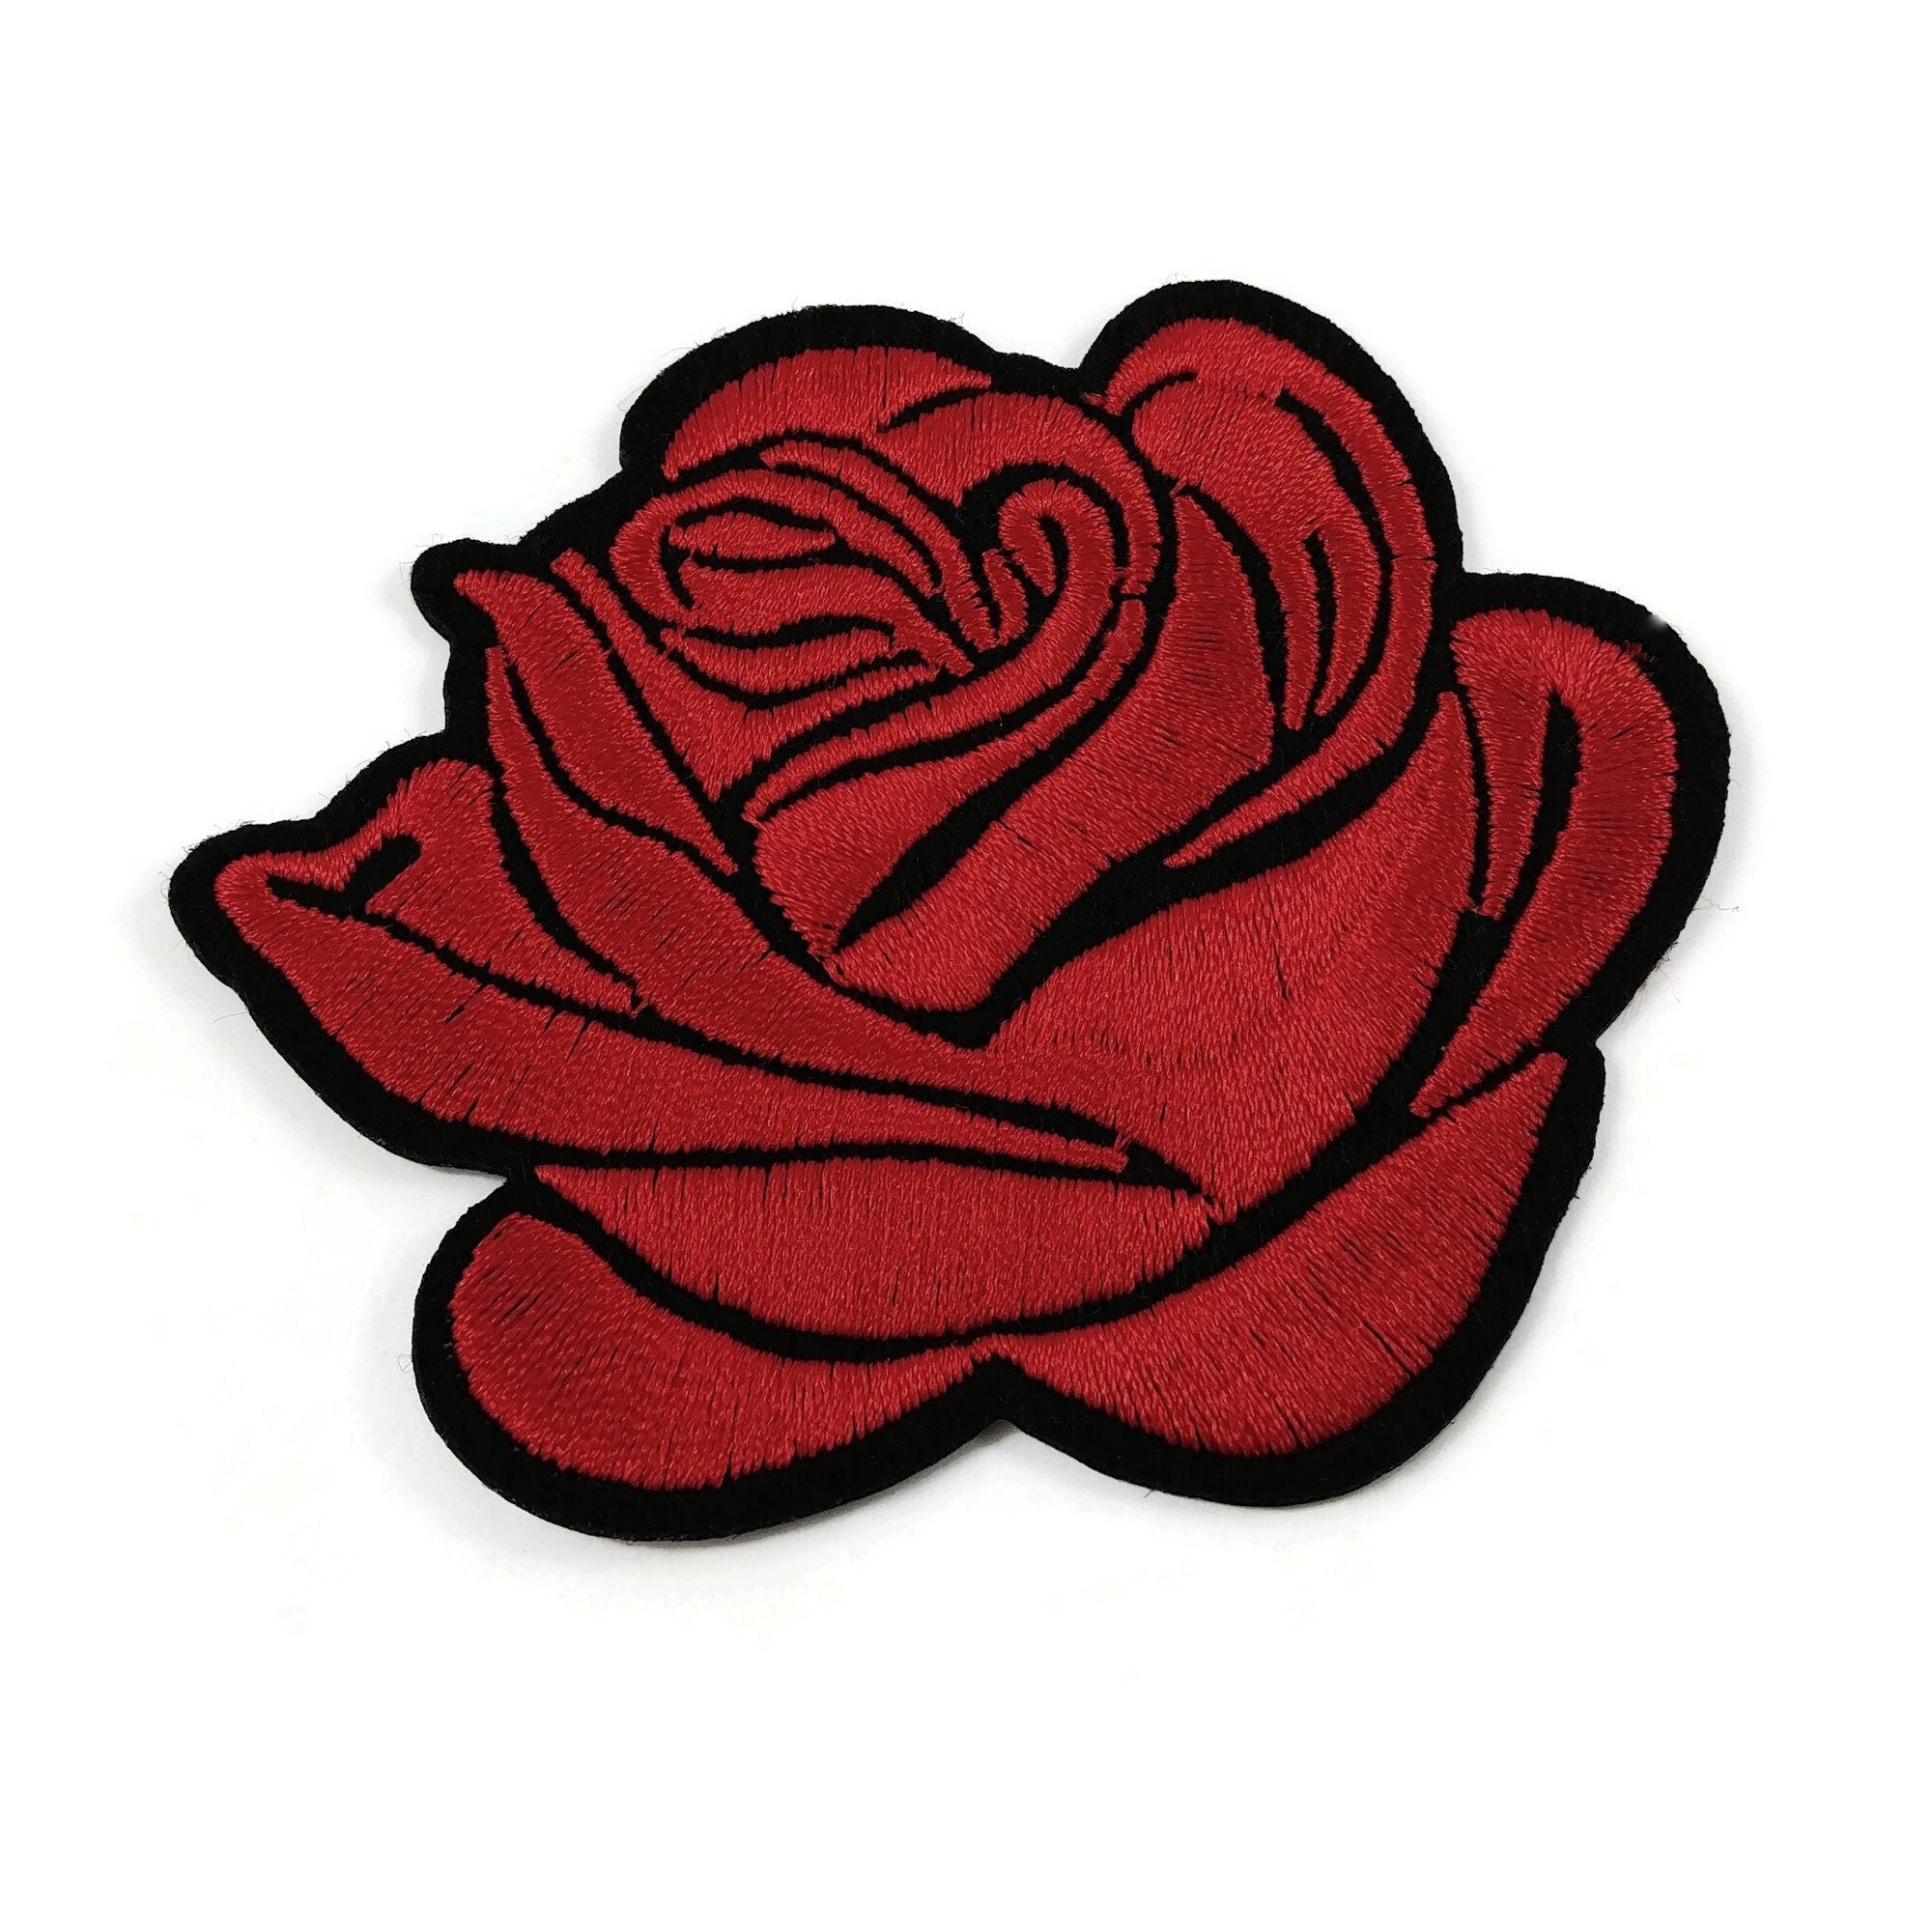 Embroidered Rose with and rosebuds on Stem Iron On Floral Patch Applique